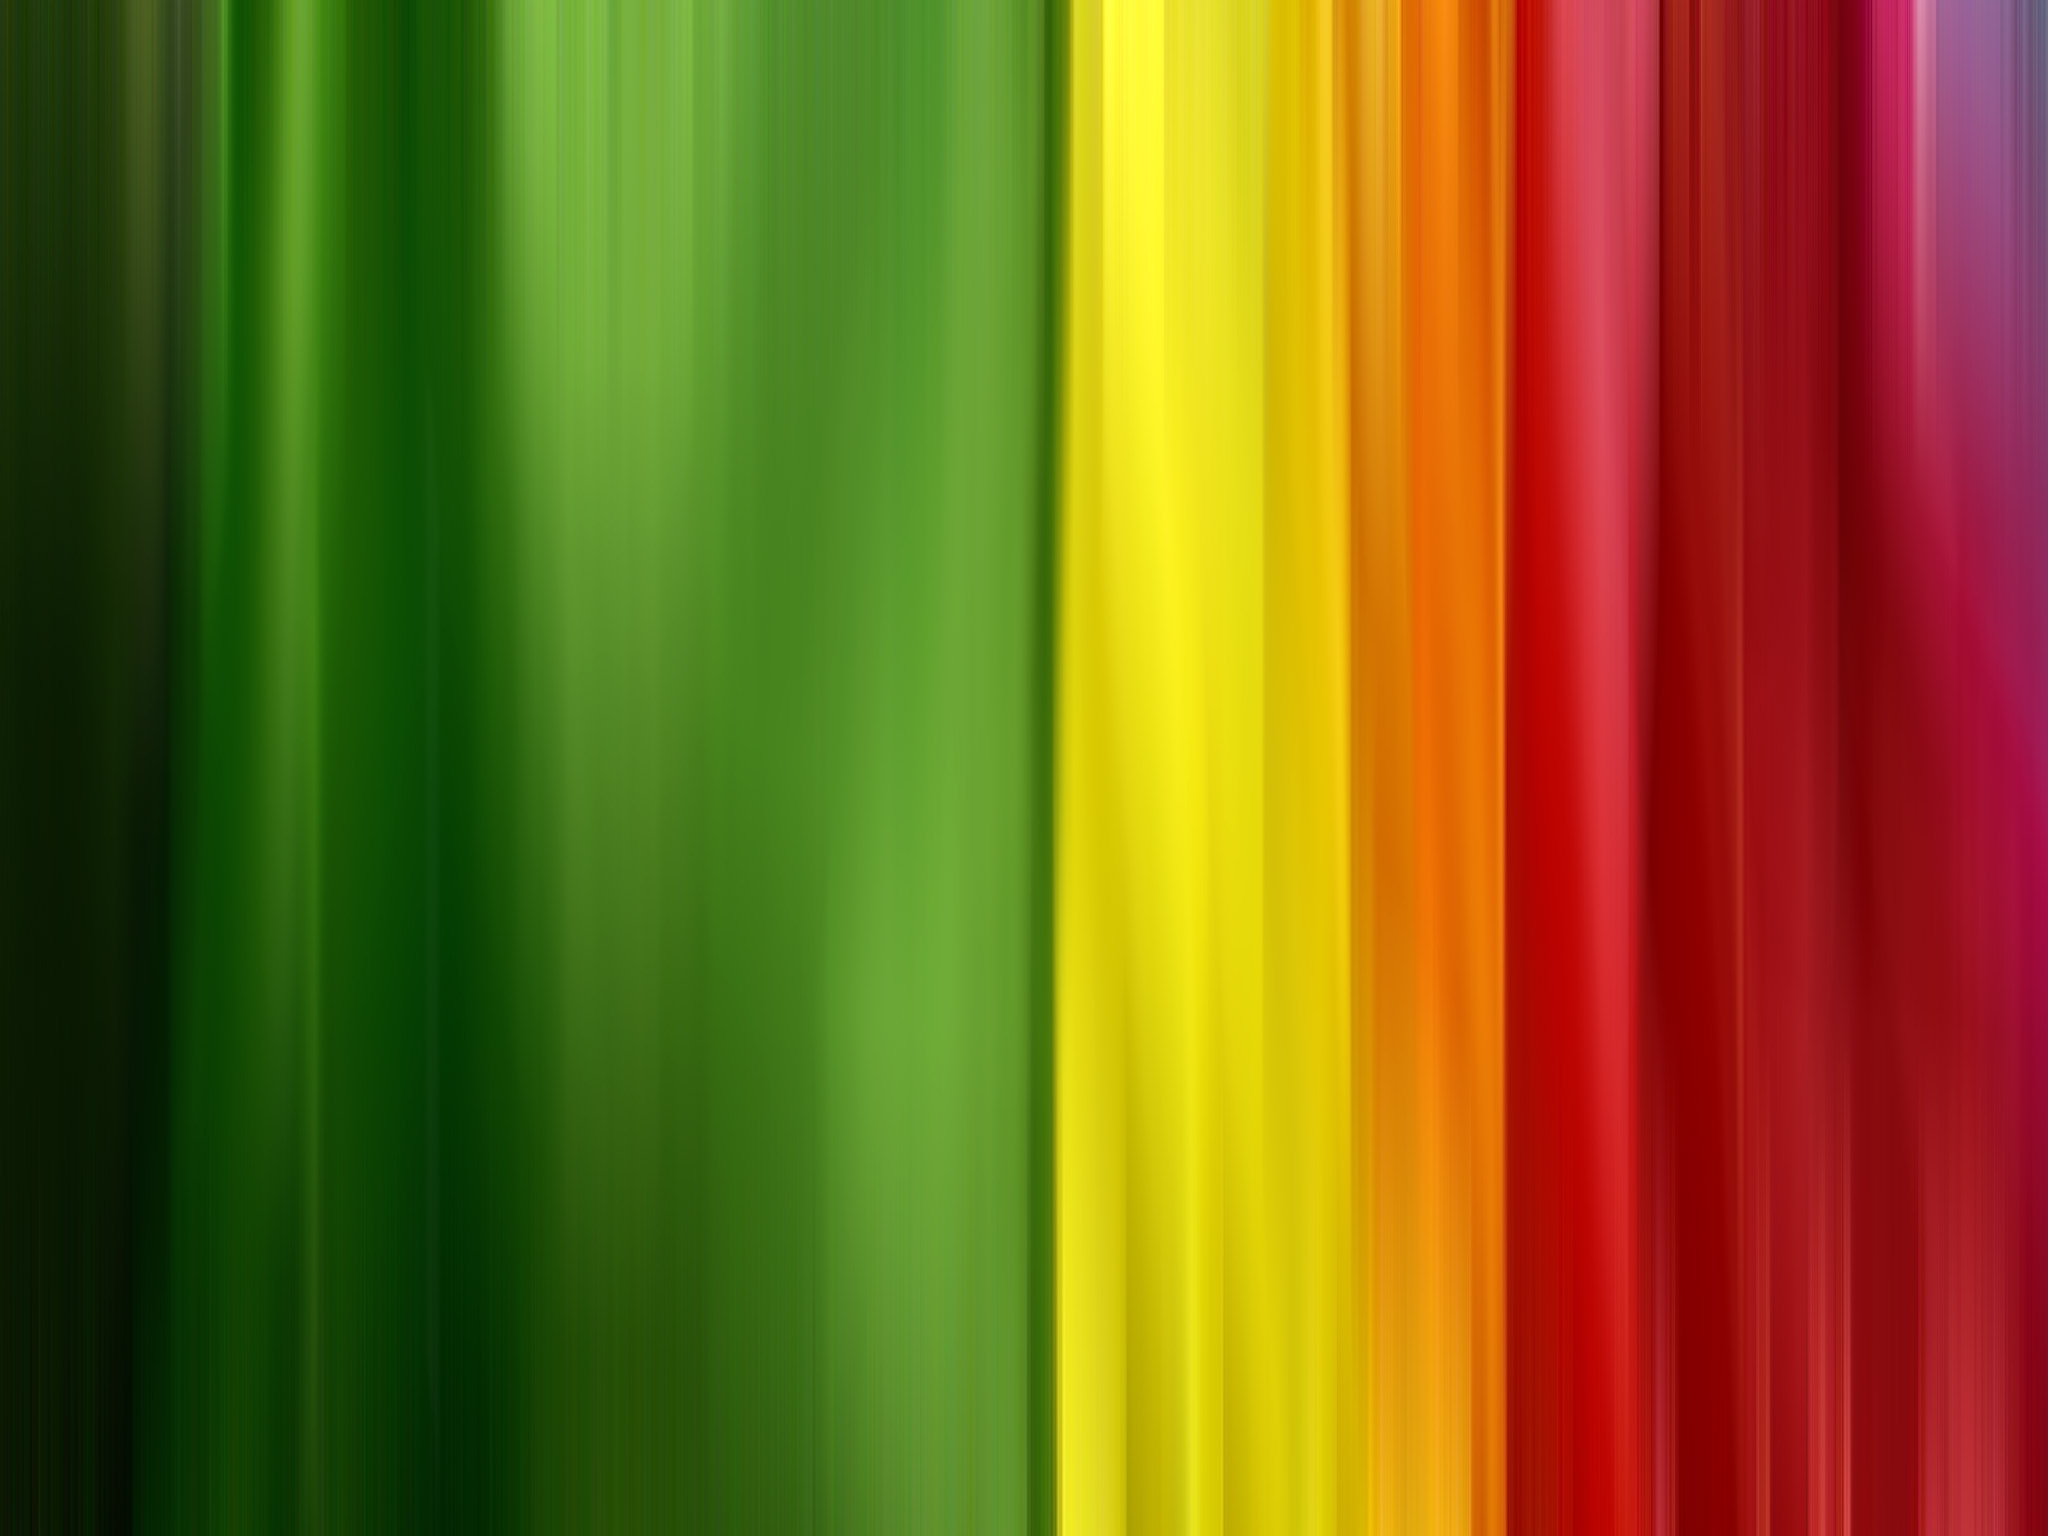 Free download Quality Stock Coloured Background 300 400 DPI up to 40003200 pix [2048x1536] for your Desktop, Mobile & Tablet. Explore Free Stock Wallpaper. Wallpaper in Stock, Apple Stock Wallpaper, Stock Wallpaper